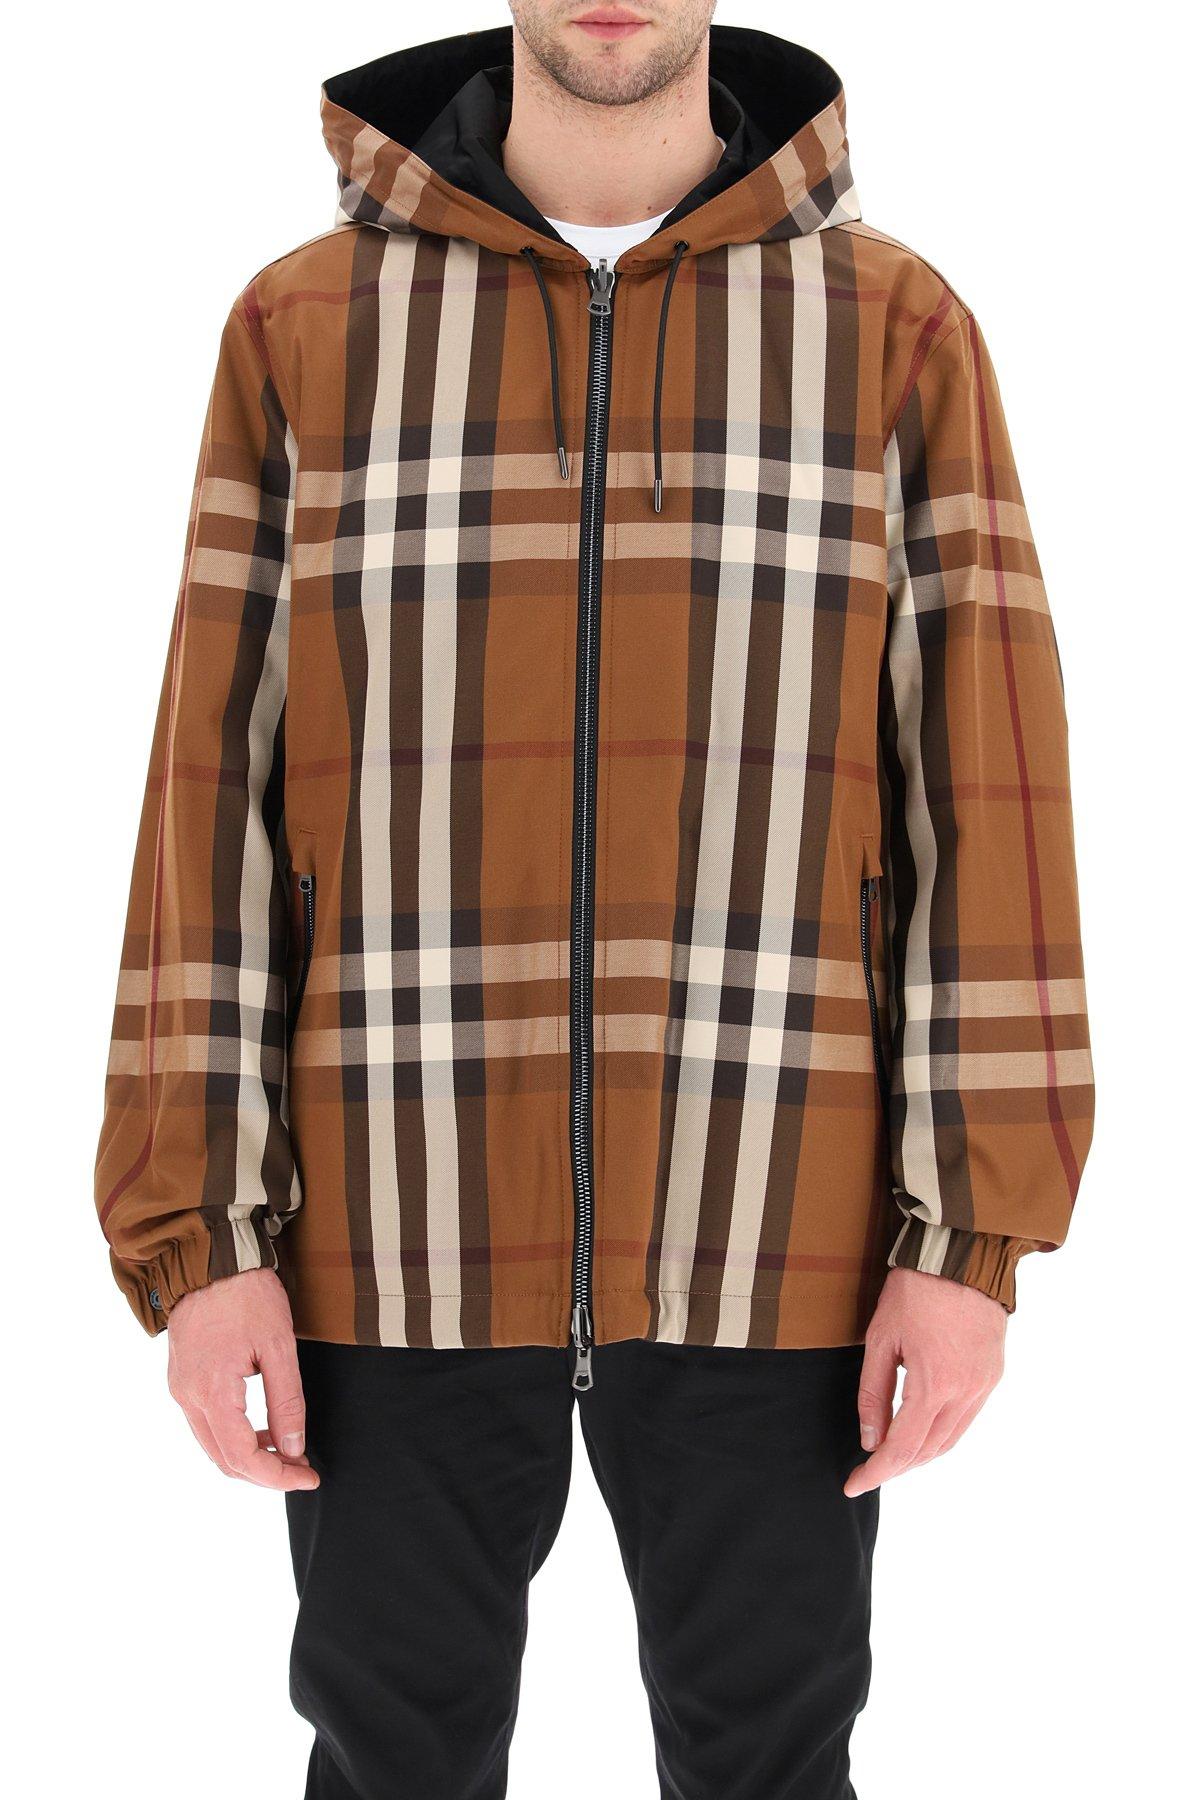 Burberry Cotton Reversible Hooded Jacket in Brown for Men - Save 14% - Lyst